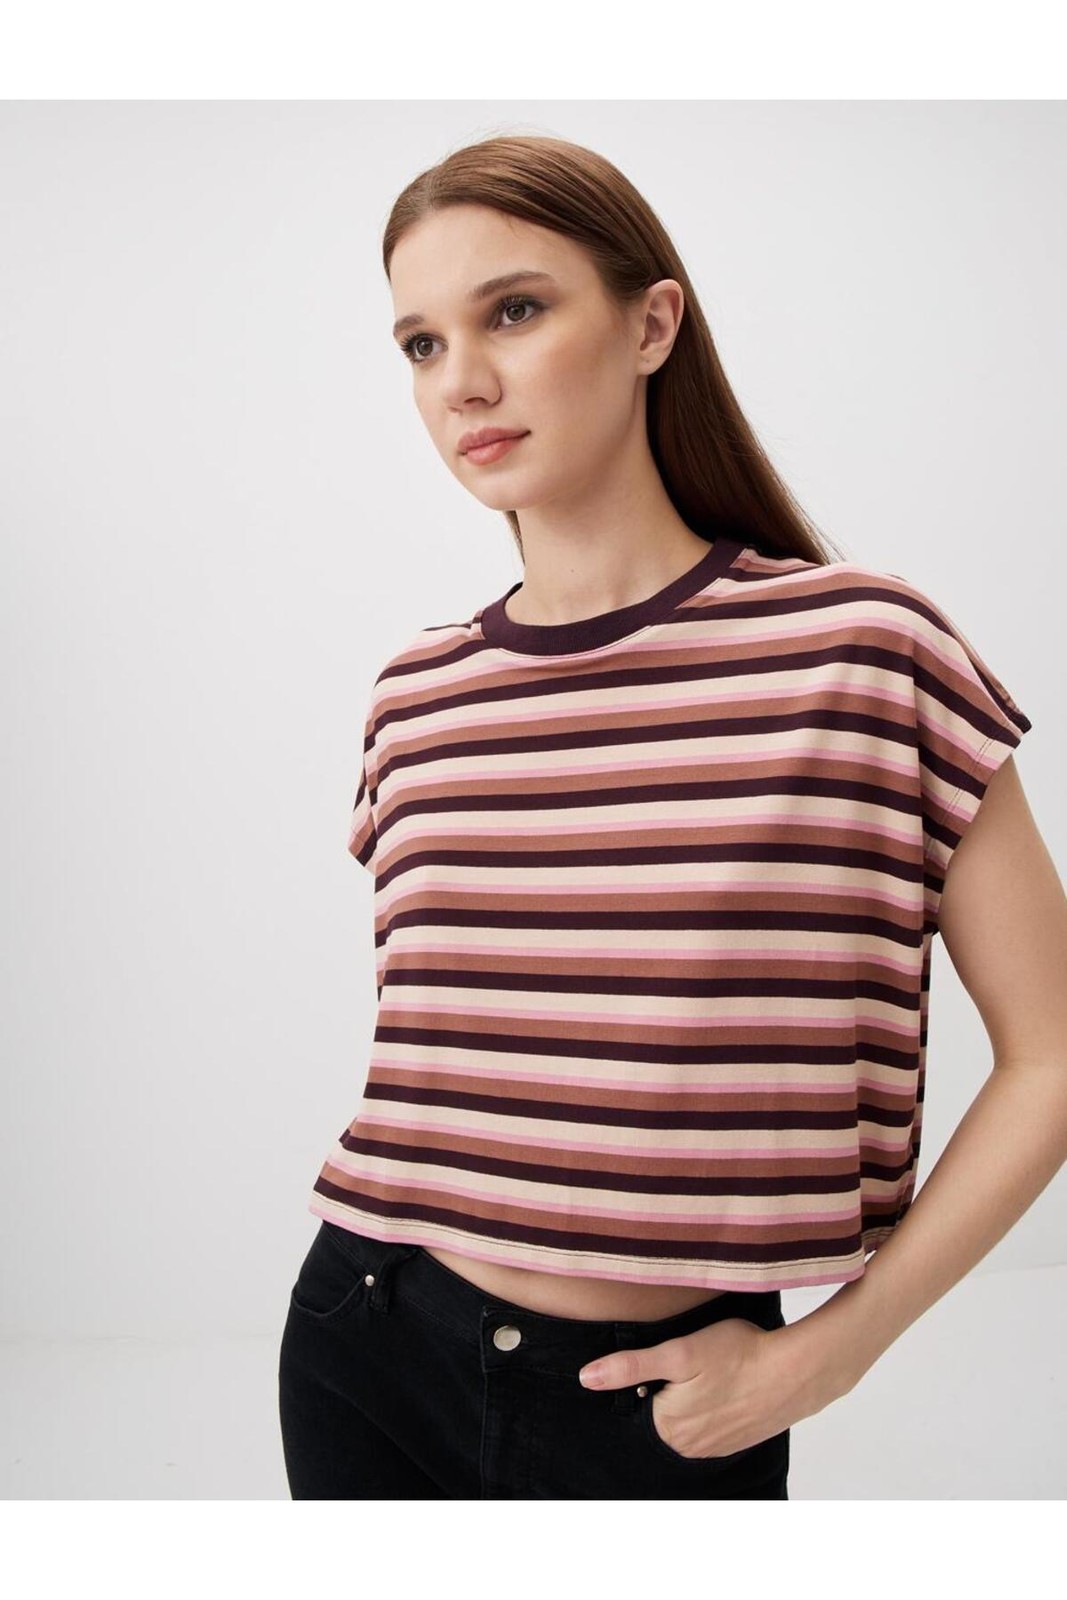 Jimmy Key Brown Crew Neck Short Sleeve Striped Knitted T-Shirt